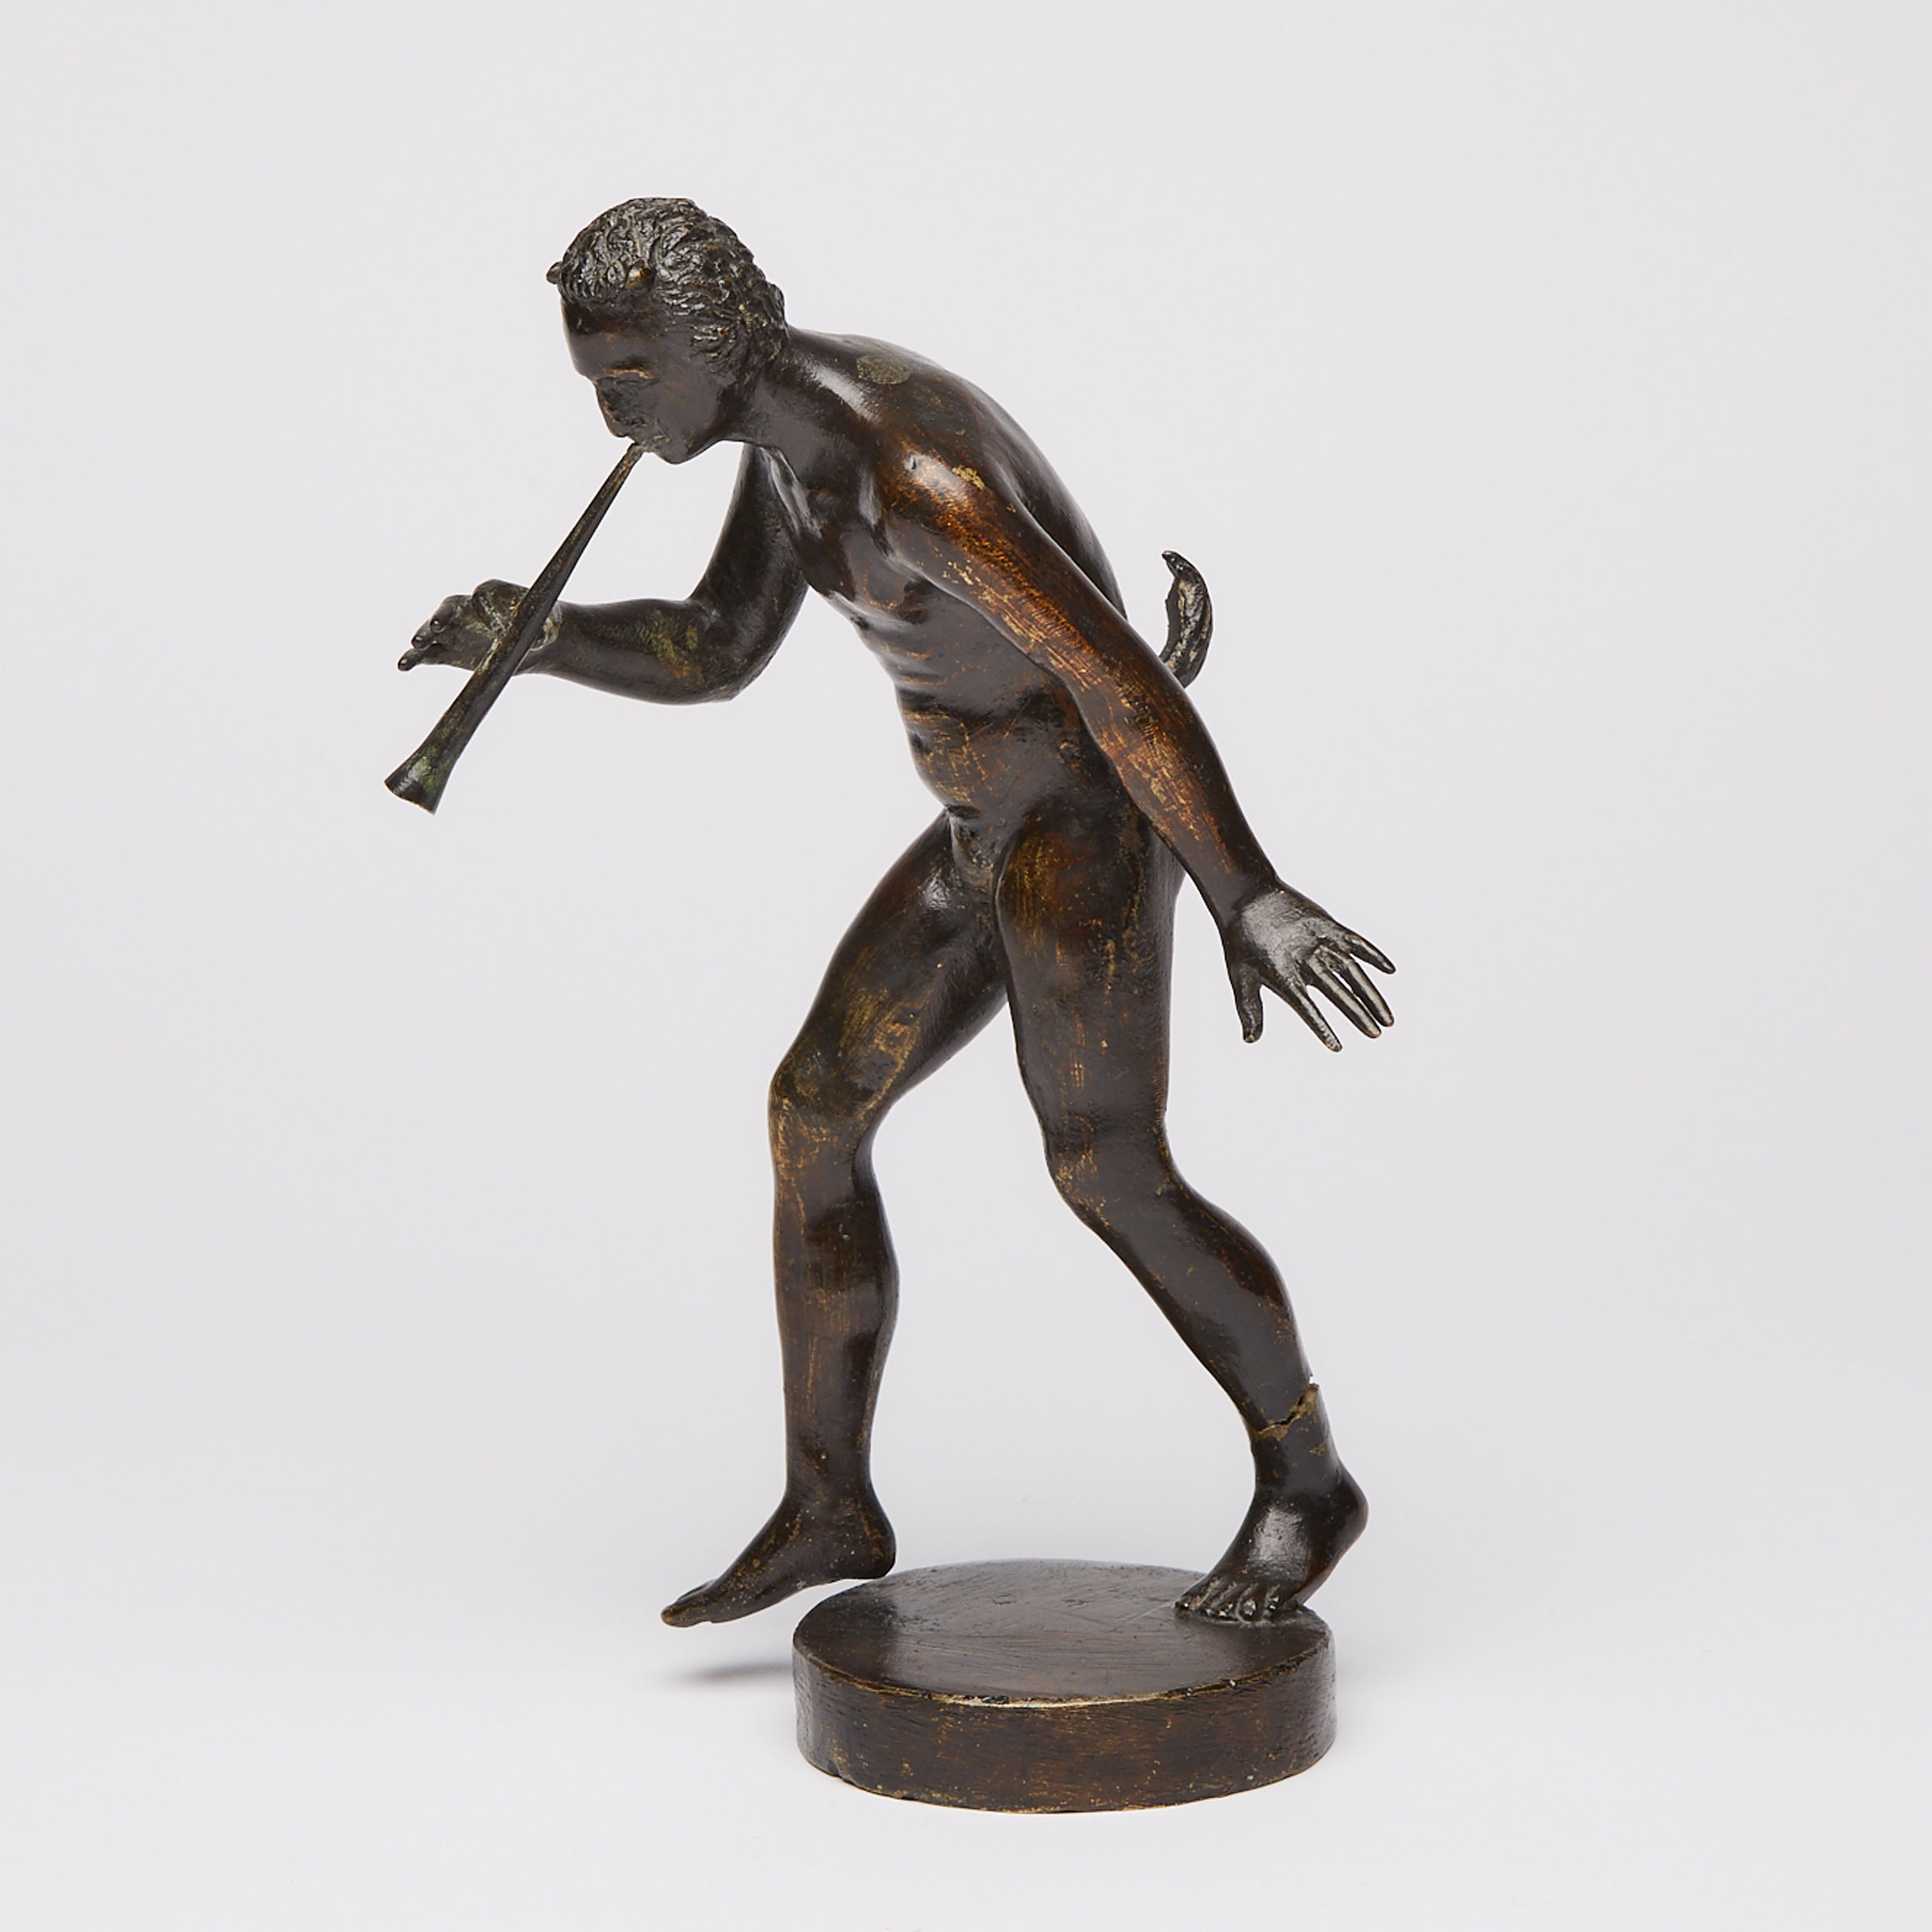 North Italian Bronze Figure of a Faun Playing a Flute, Attributed to the Workshop of Severo Calzetta da Ravenna, Padua, early 17th century